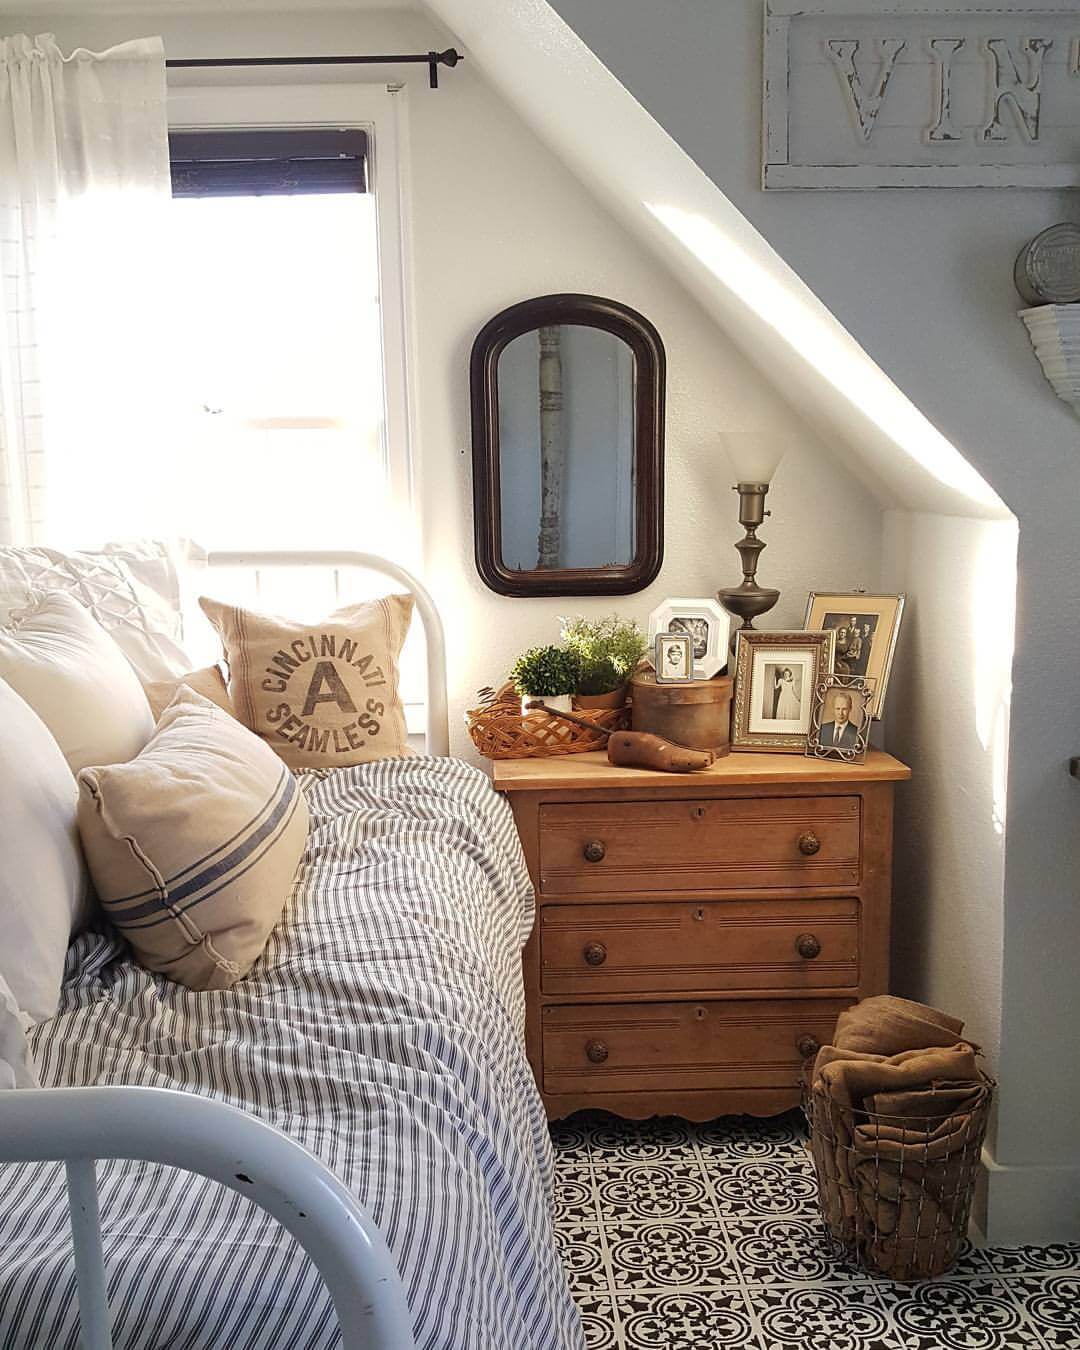 A Comfy Bed with a Small Dresser